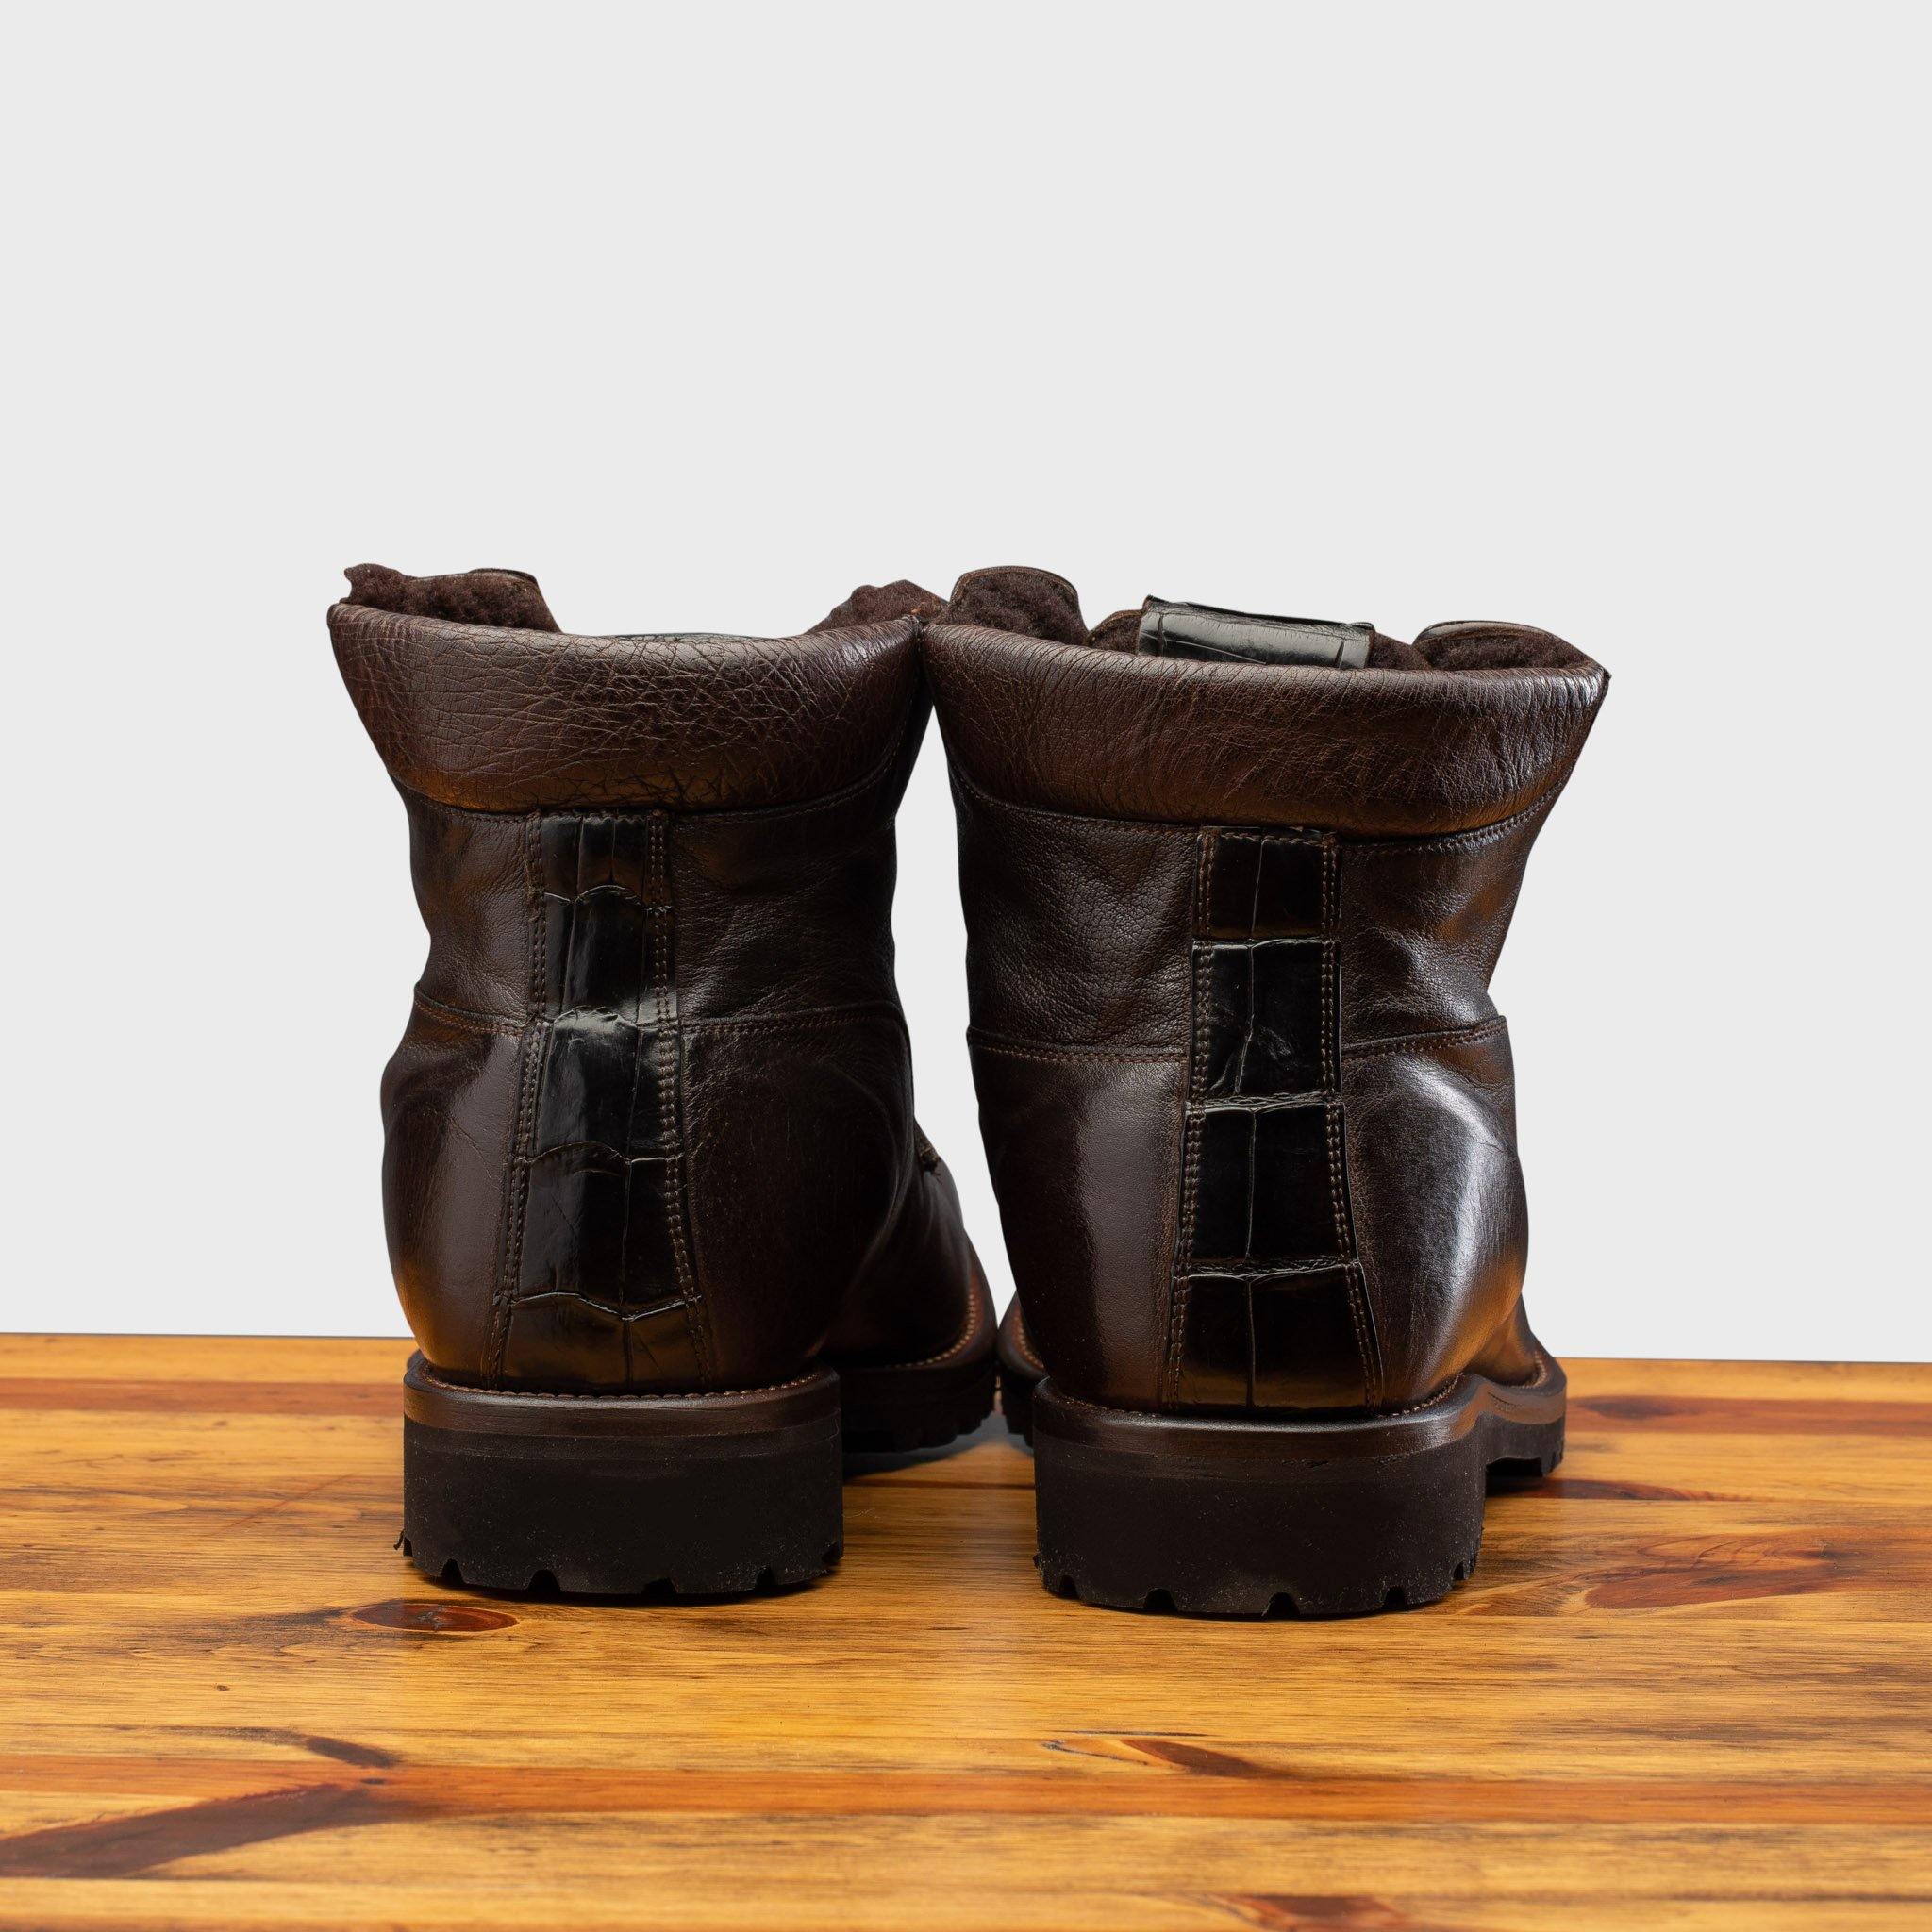 Back profile of the 3236 Calzoleria Toscana Dark Brown Shearling Boot on top of a wooden table